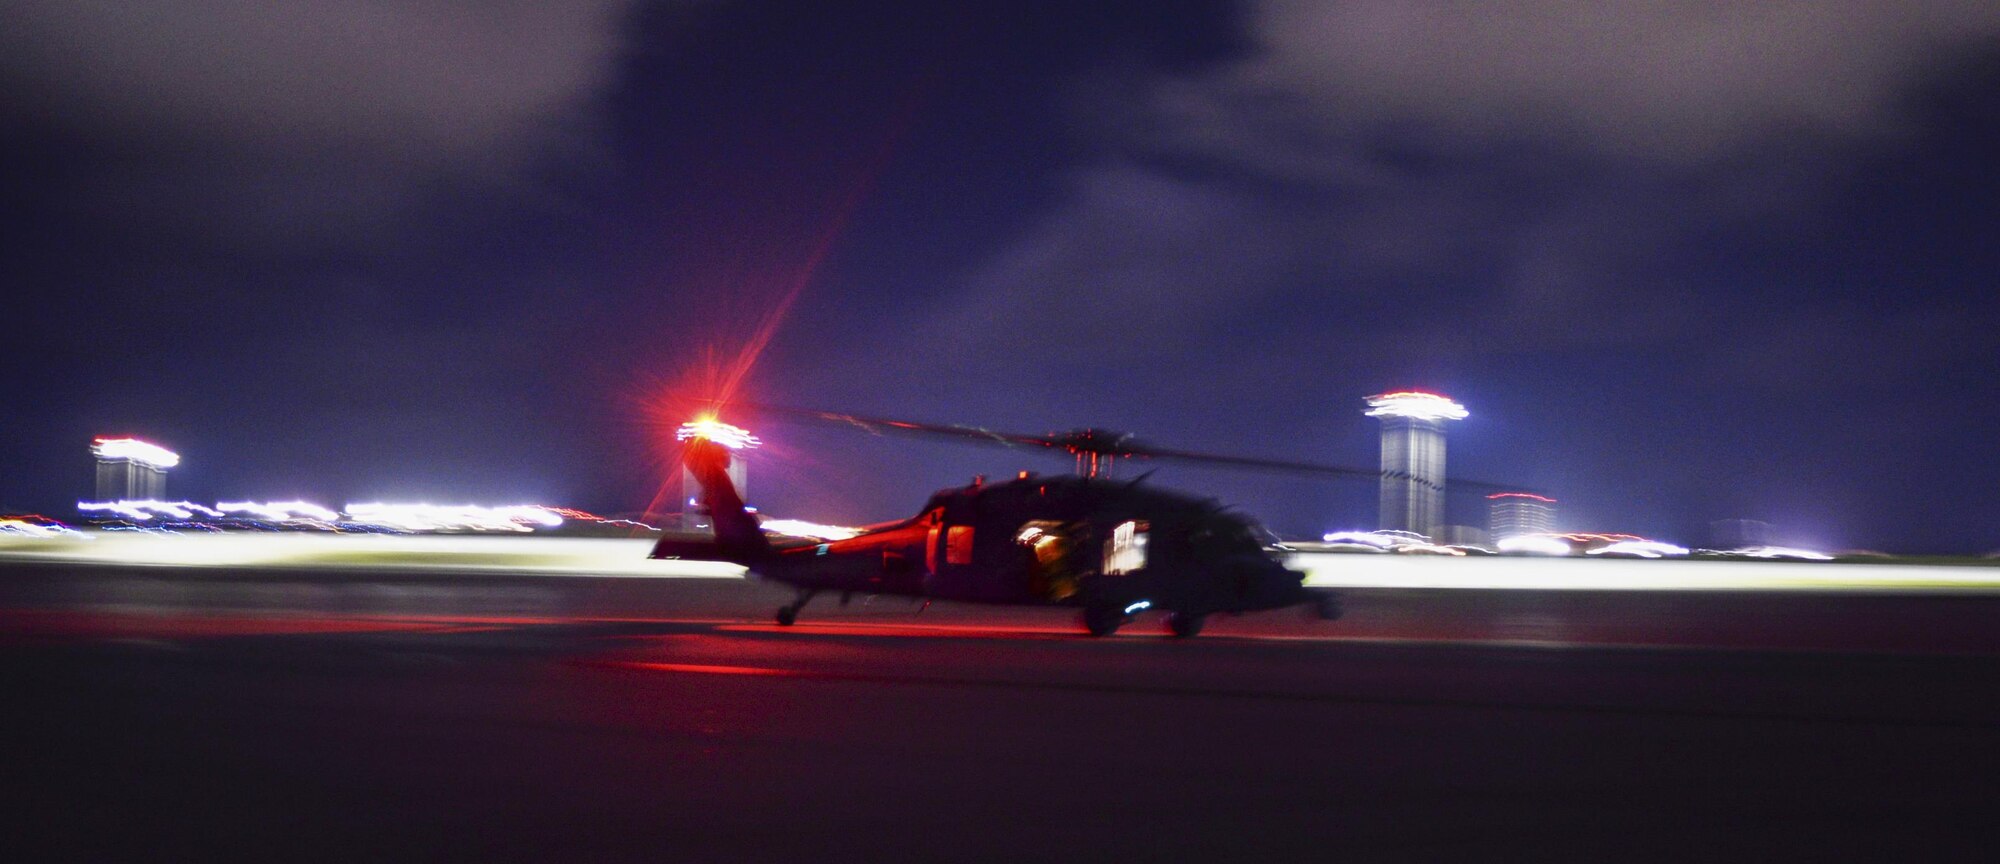 An MH-60S Sea Hawk helicopter assigned to the Island Knights of Helicopter Sea Combat Squadron (HSC) 25 condusts a training flight June 16, 2016, at Andersen Air Force Base, Guam. HSC-25 maintains a 24-hour search and rescue and medical evacuation alert posture, directly supporting the U.S. Coast Guard, Sector Guam and Joint Region Marianas. HSC-25 ensures maritime peace and security in the U.S. 7th Fleet area of responsibility. (U.S. Air Force photo by Tech. Sgt. Richard Ebensberger)